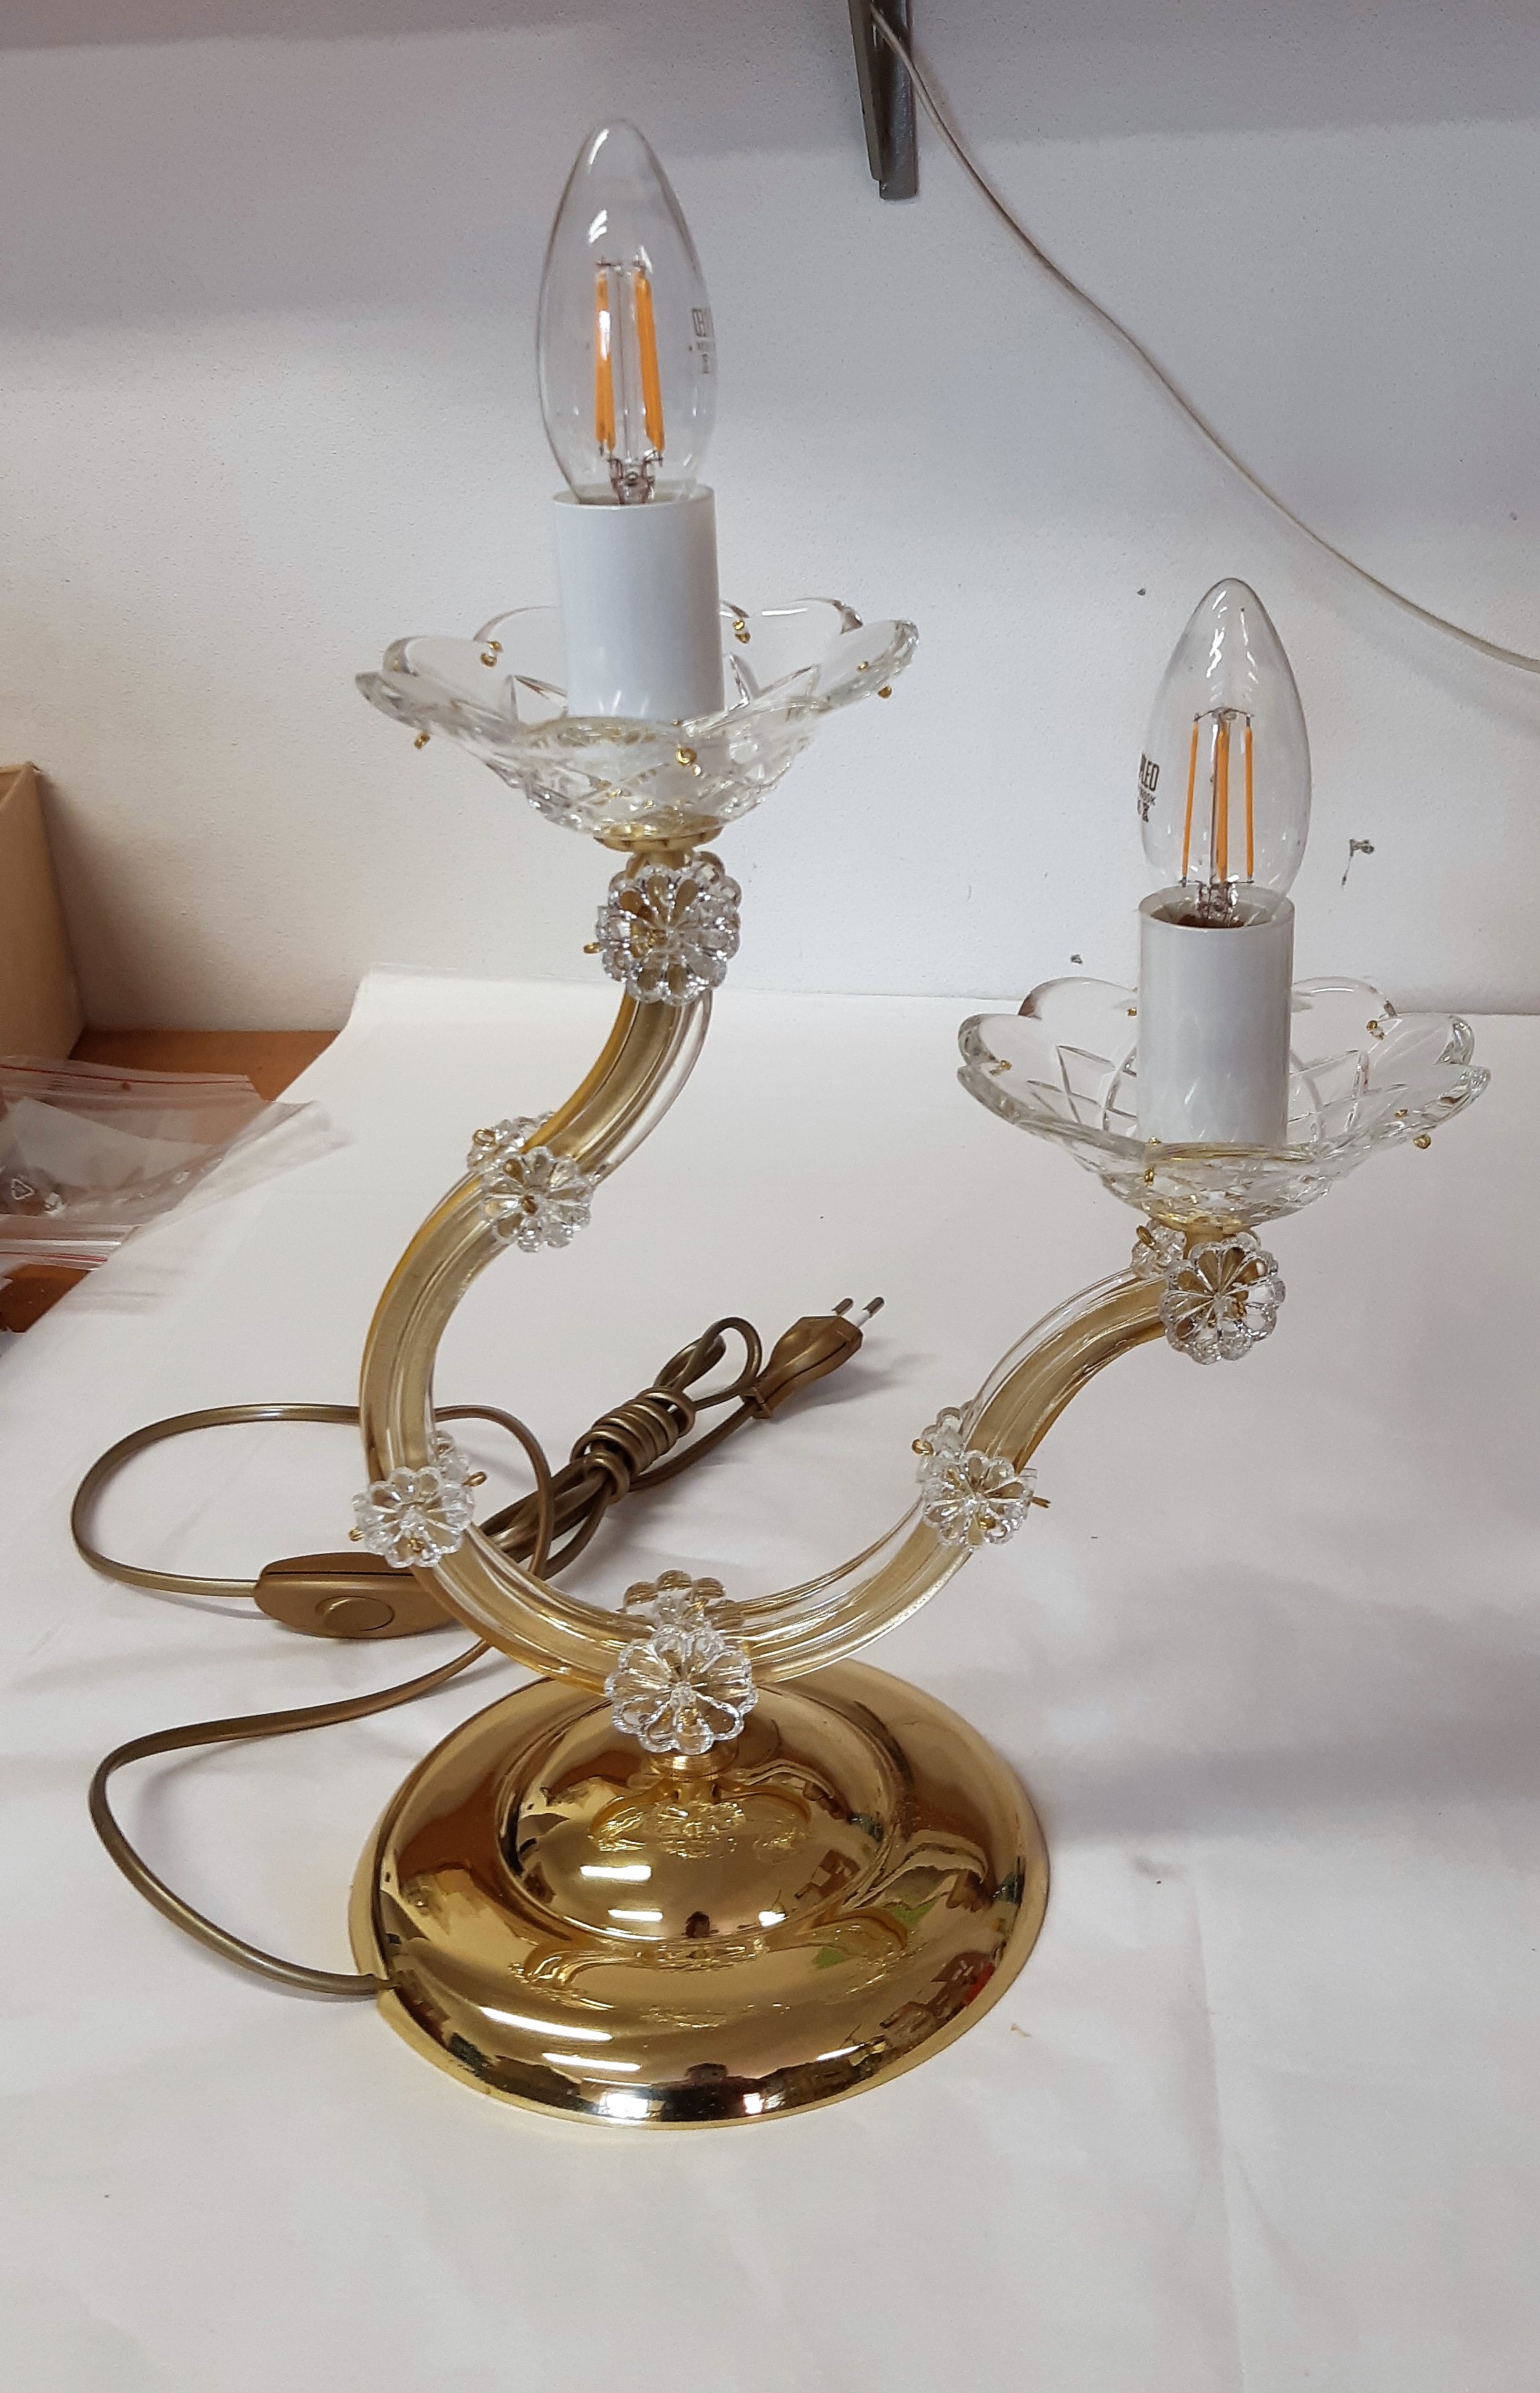 Redesigned Theresian candlestick for an electric table lamp